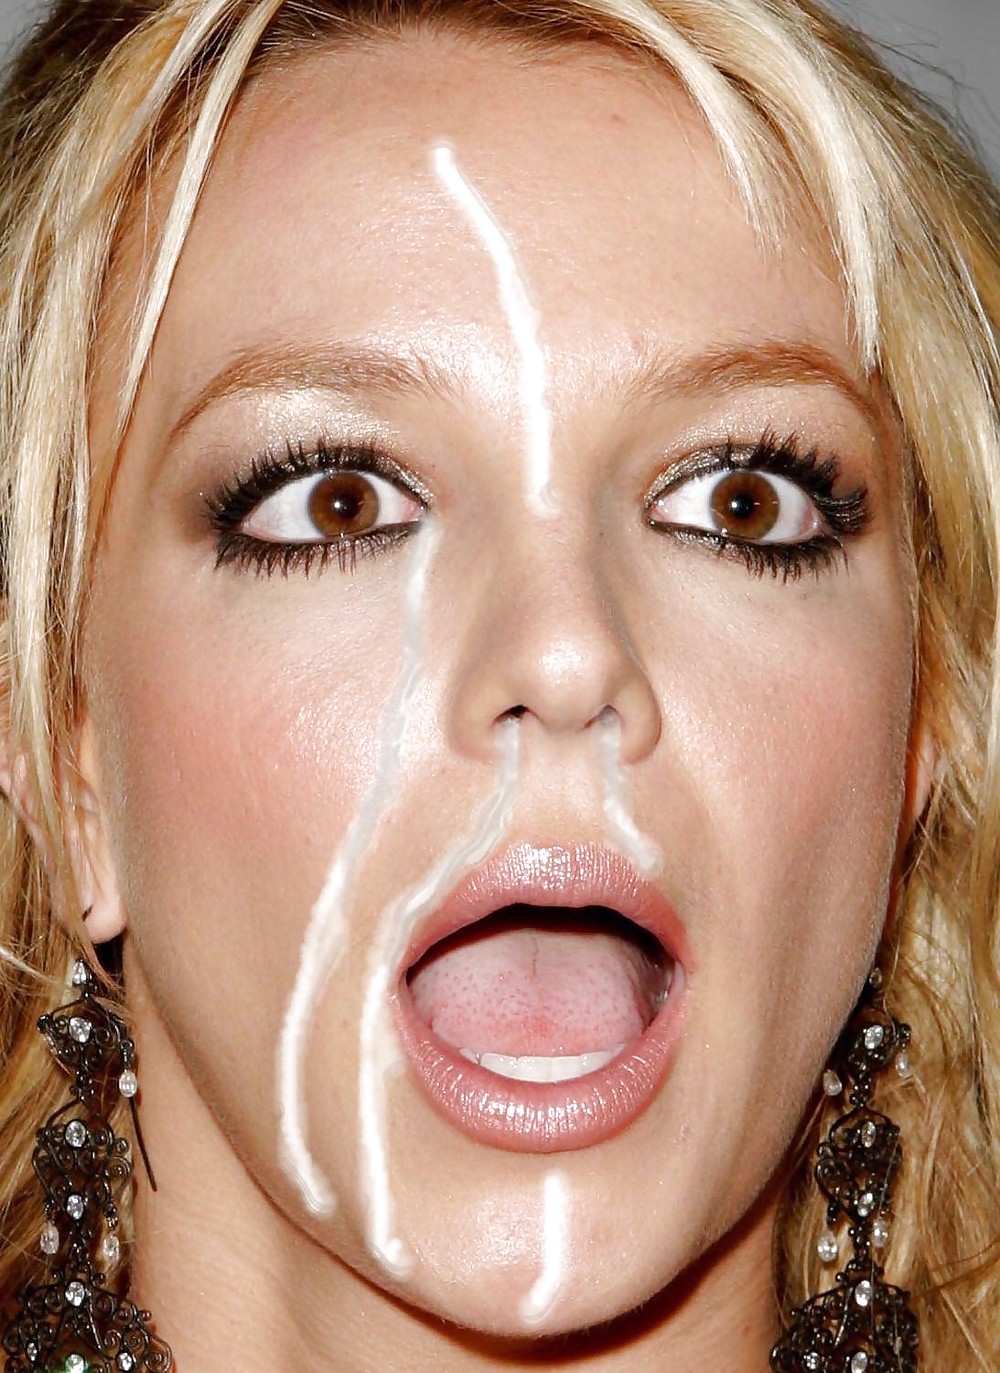 Britney Spears Fake Porn - Britney Spears Fake Facial but pretty good. - 6 Pics | xHamster